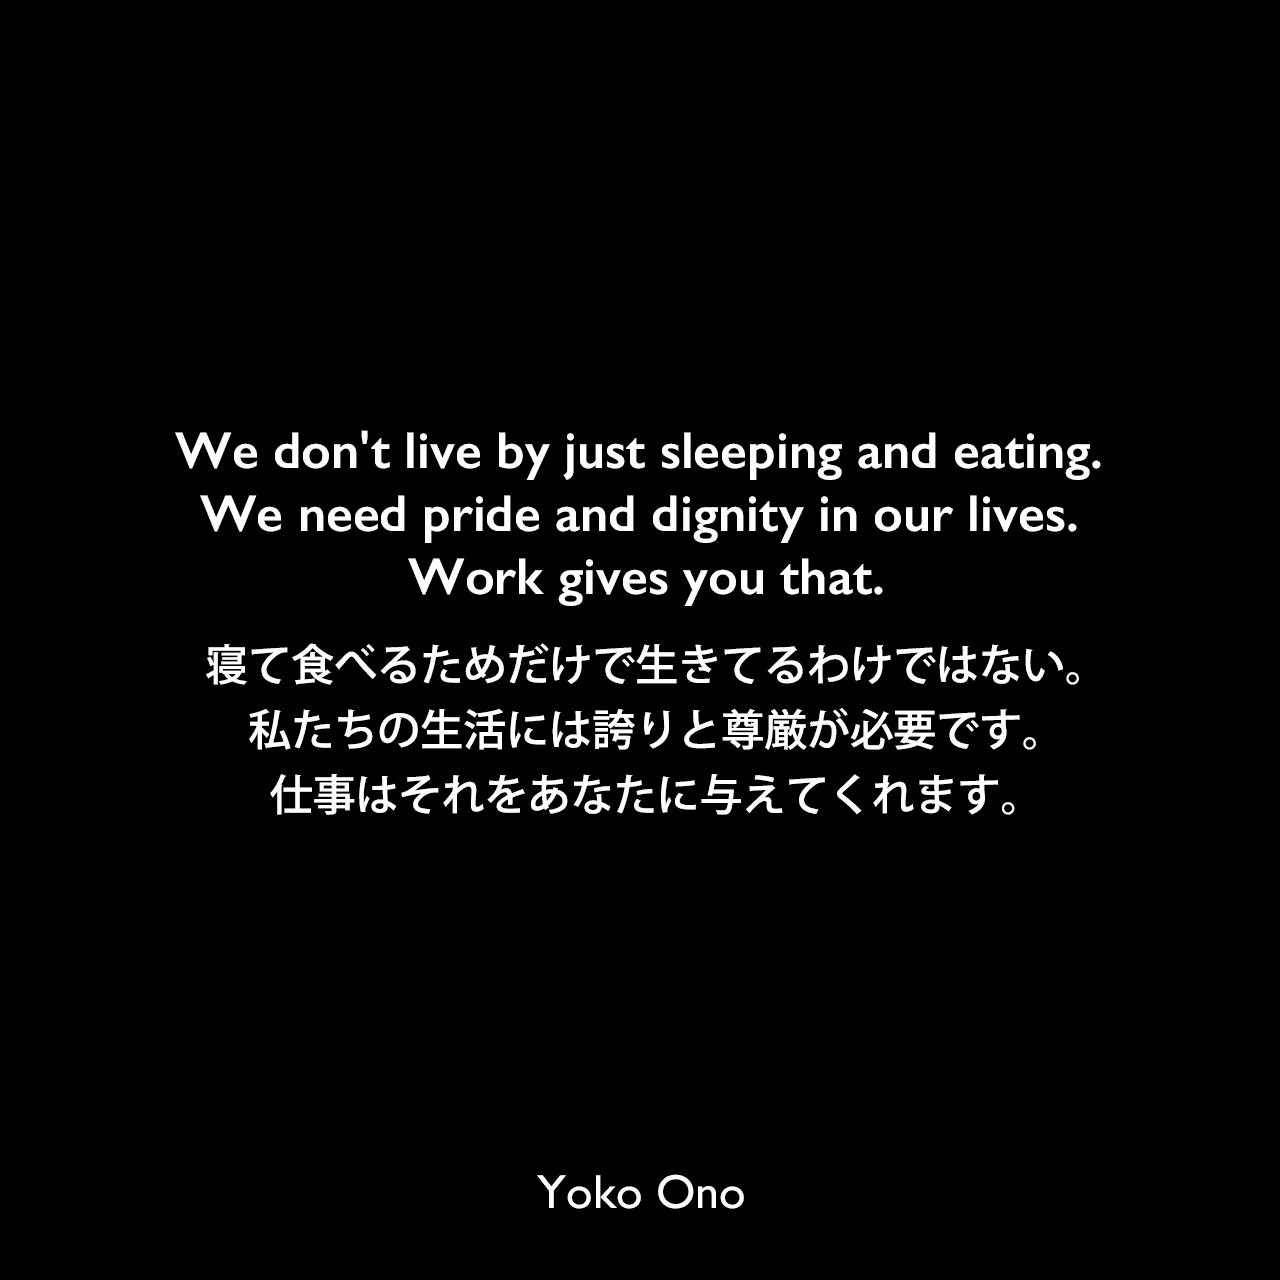 We don't live by just sleeping and eating. We need pride and dignity in our lives. Work gives you that.寝て食べるためだけで生きてるわけではない。私たちの生活には誇りと尊厳が必要です。仕事はそれをあなたに与えてくれます。Yoko Ono